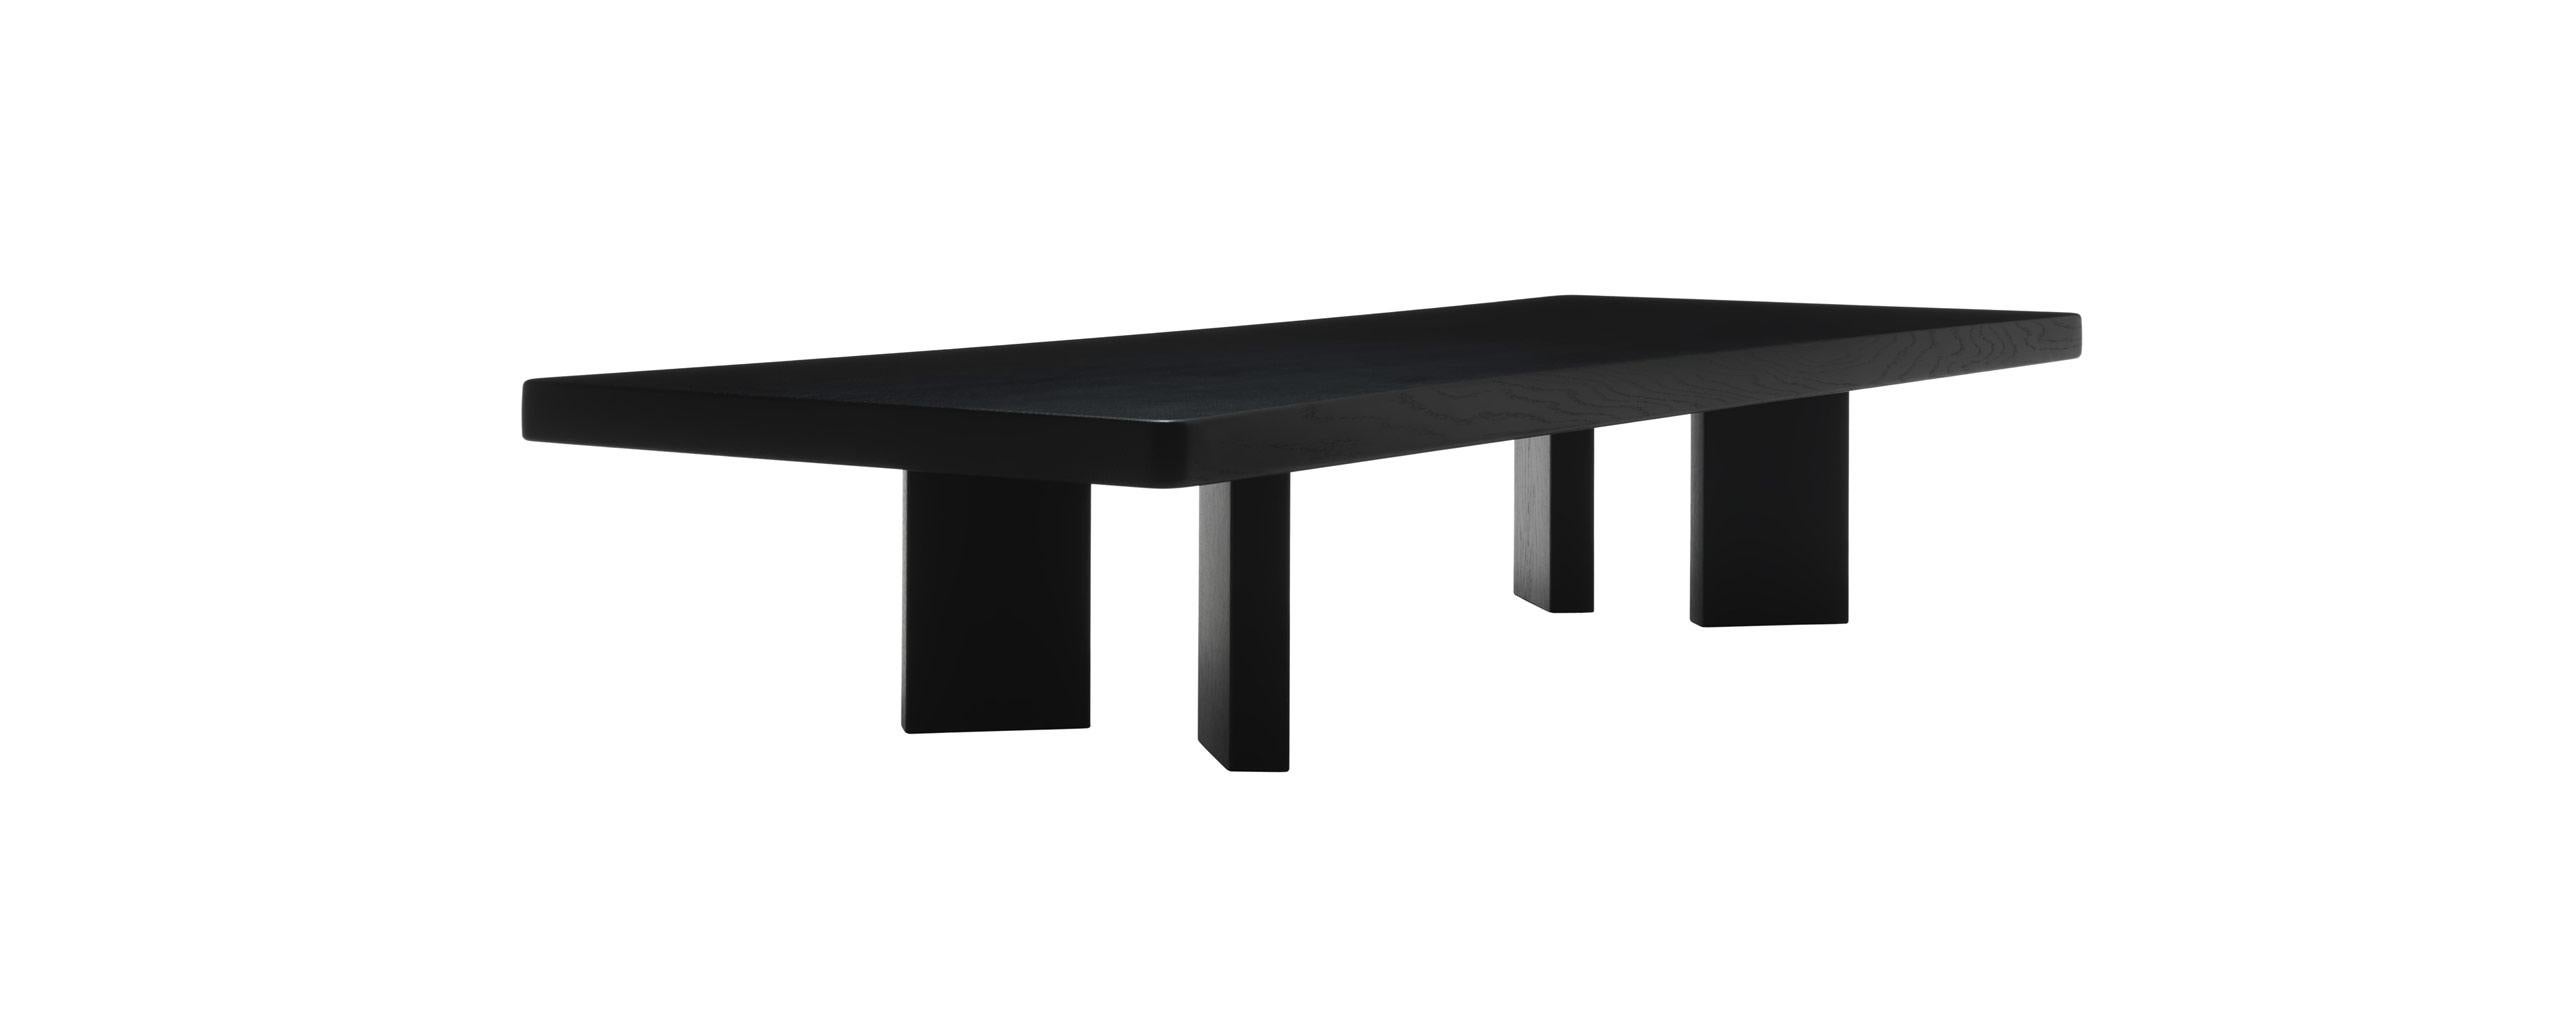 Italian Charlotte Perriand 515 Plana Coffee Table, Black Stained Wood